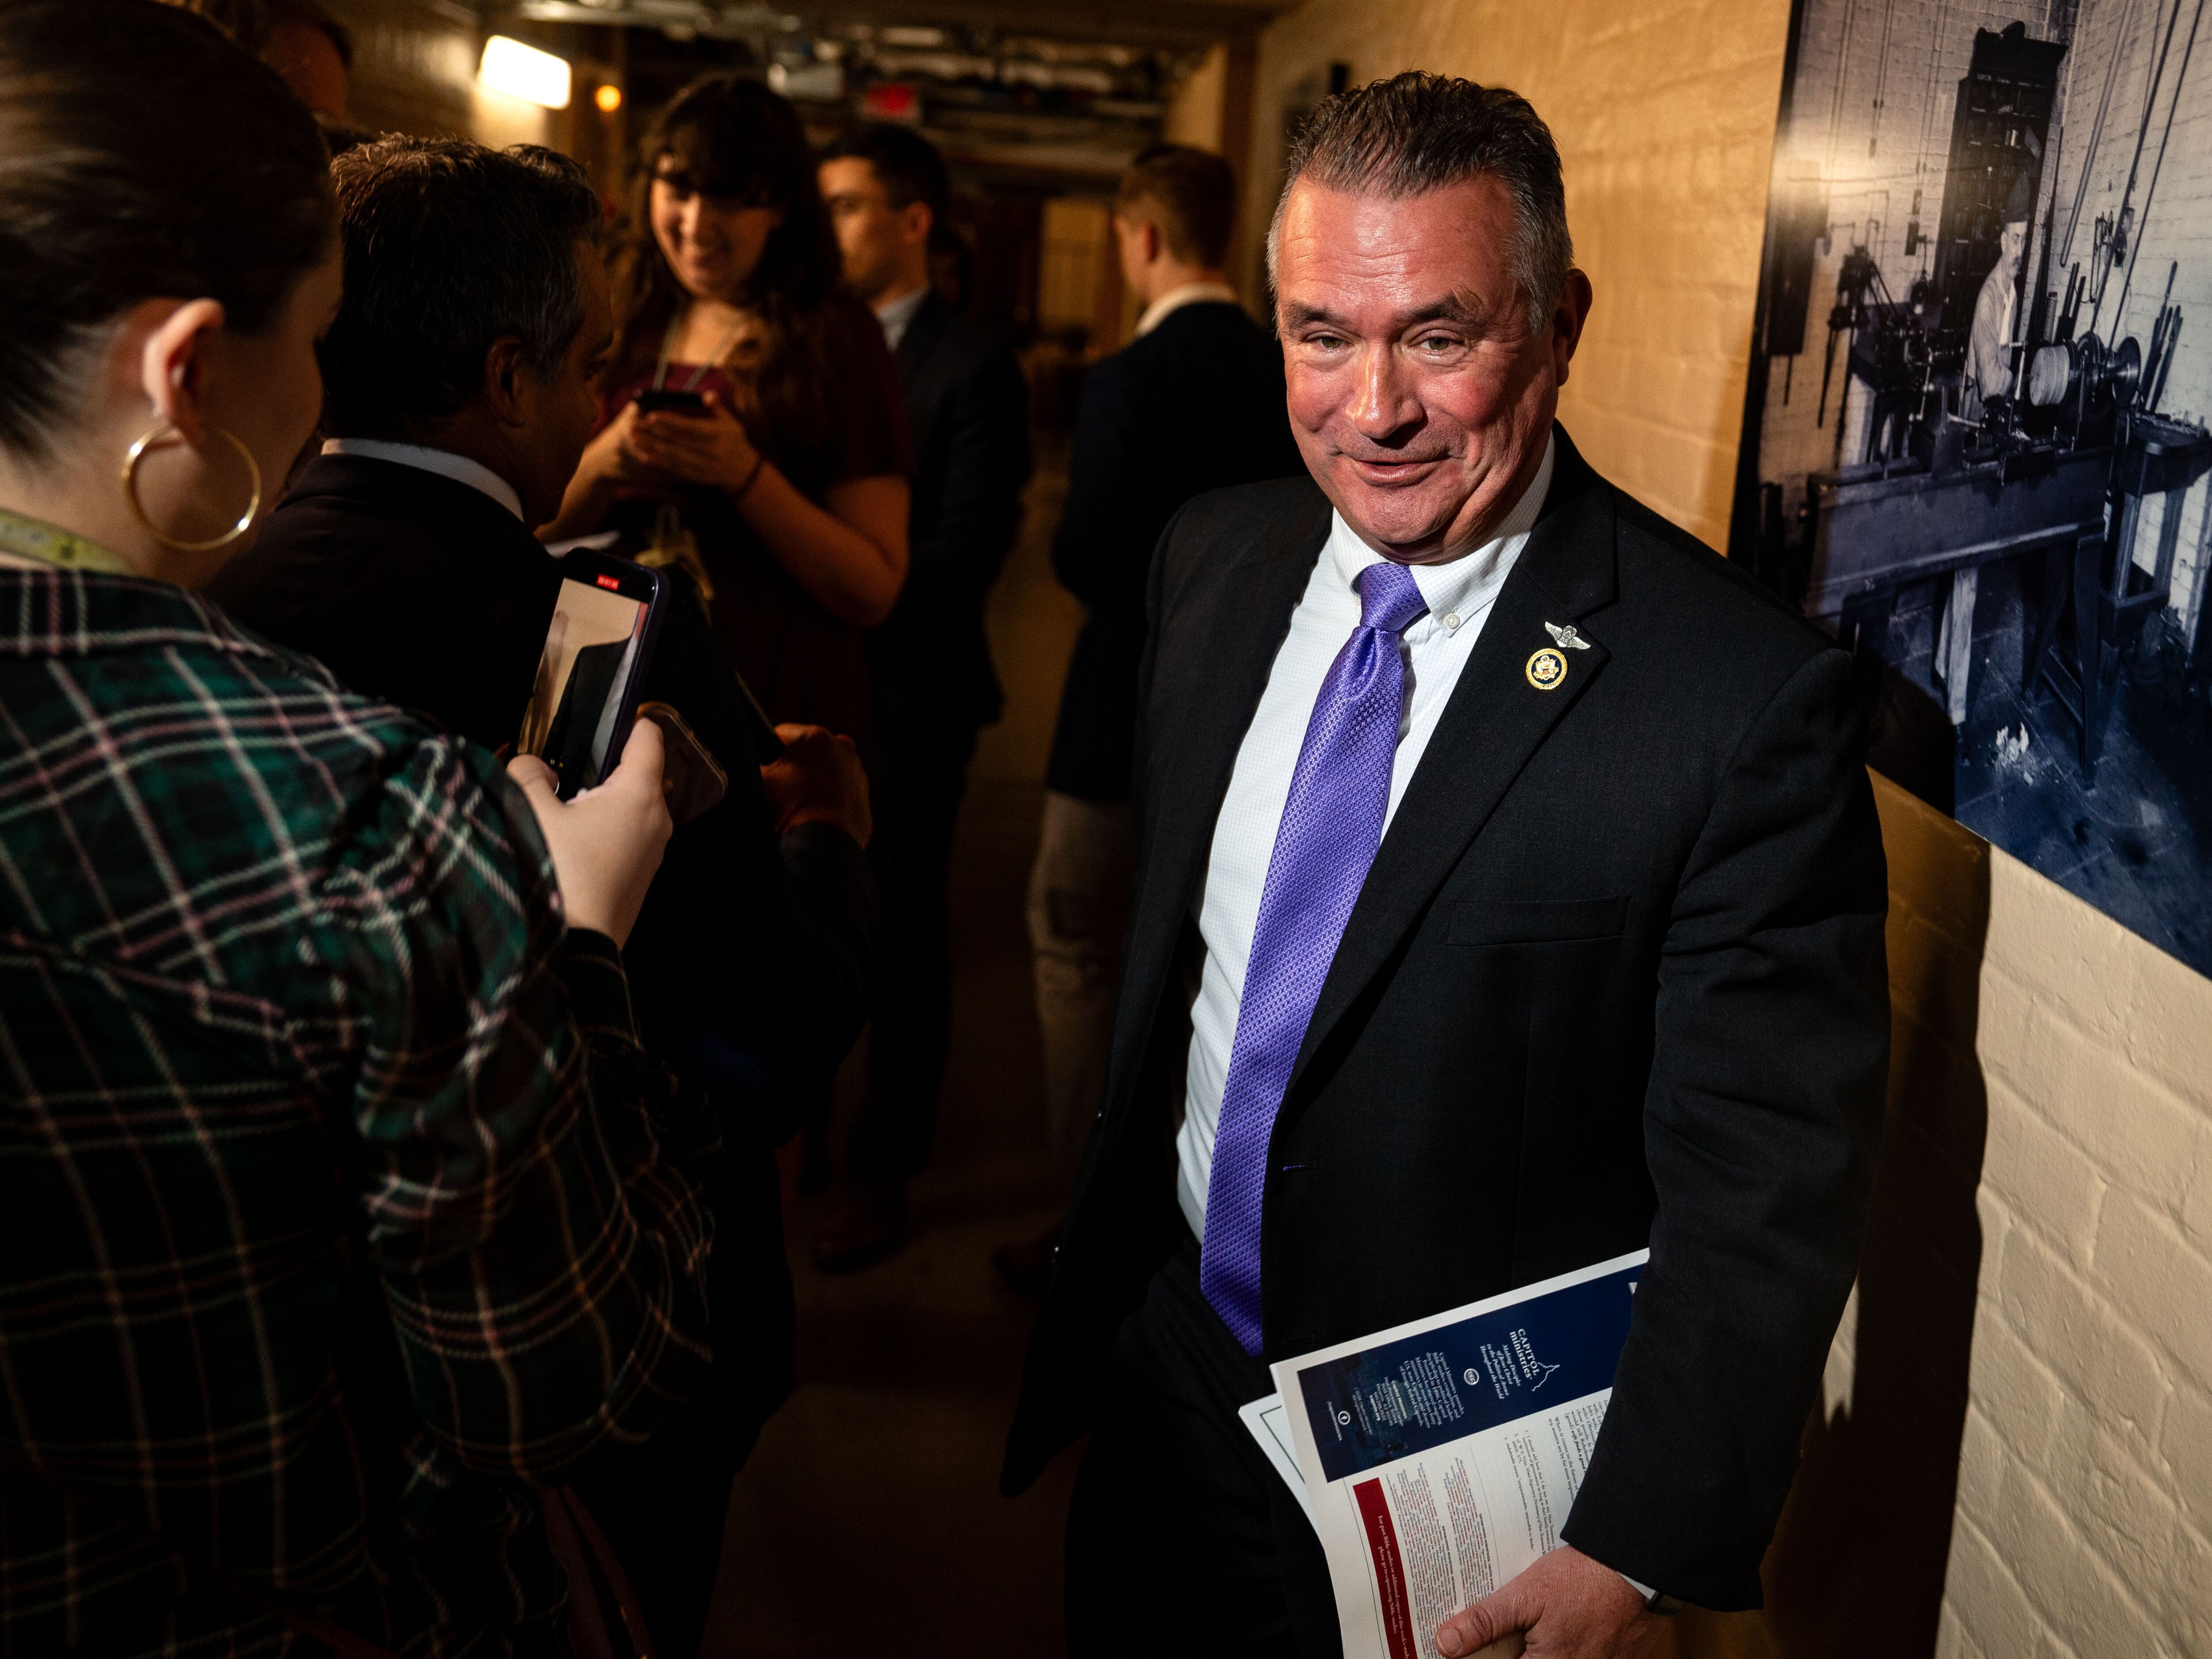 Rep. Don Bacon is seen here leaving a meeting of the House Republican Conference at the U.S. Capitol on May 7. House Republicans have raised concerns over what they call a rise of antisemitism amid the Pro-Palestinian protests on college campuses across the United States.